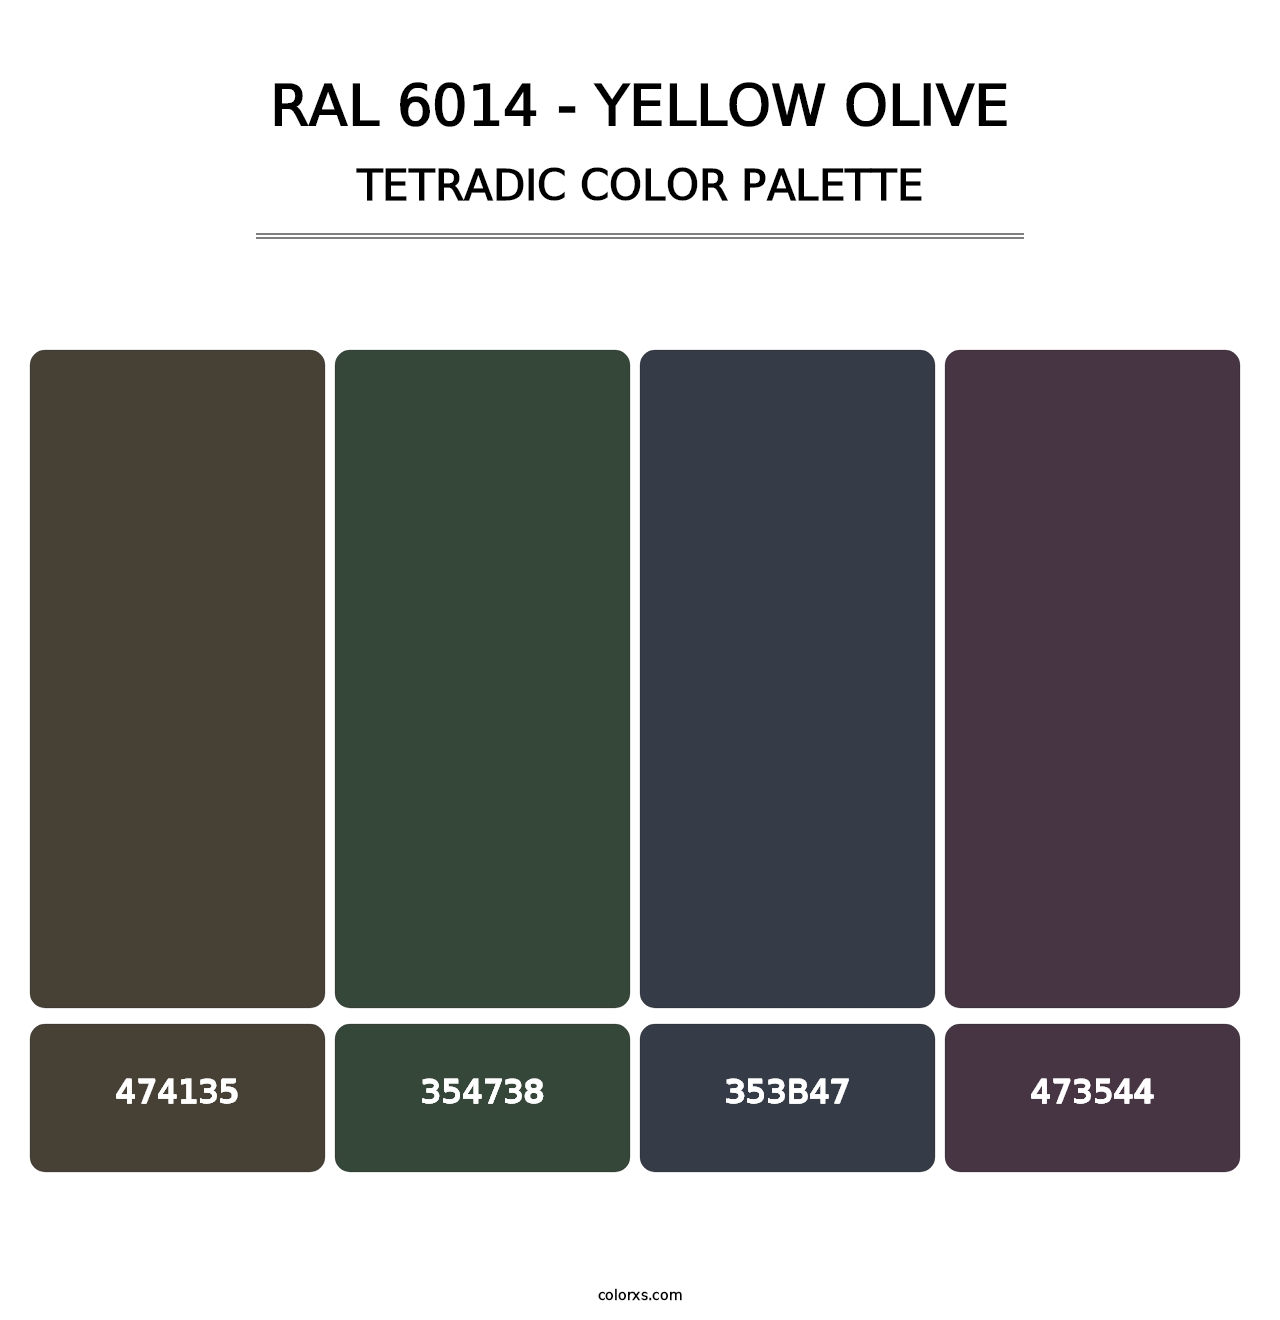 RAL 6014 - Yellow Olive - Tetradic Color Palette